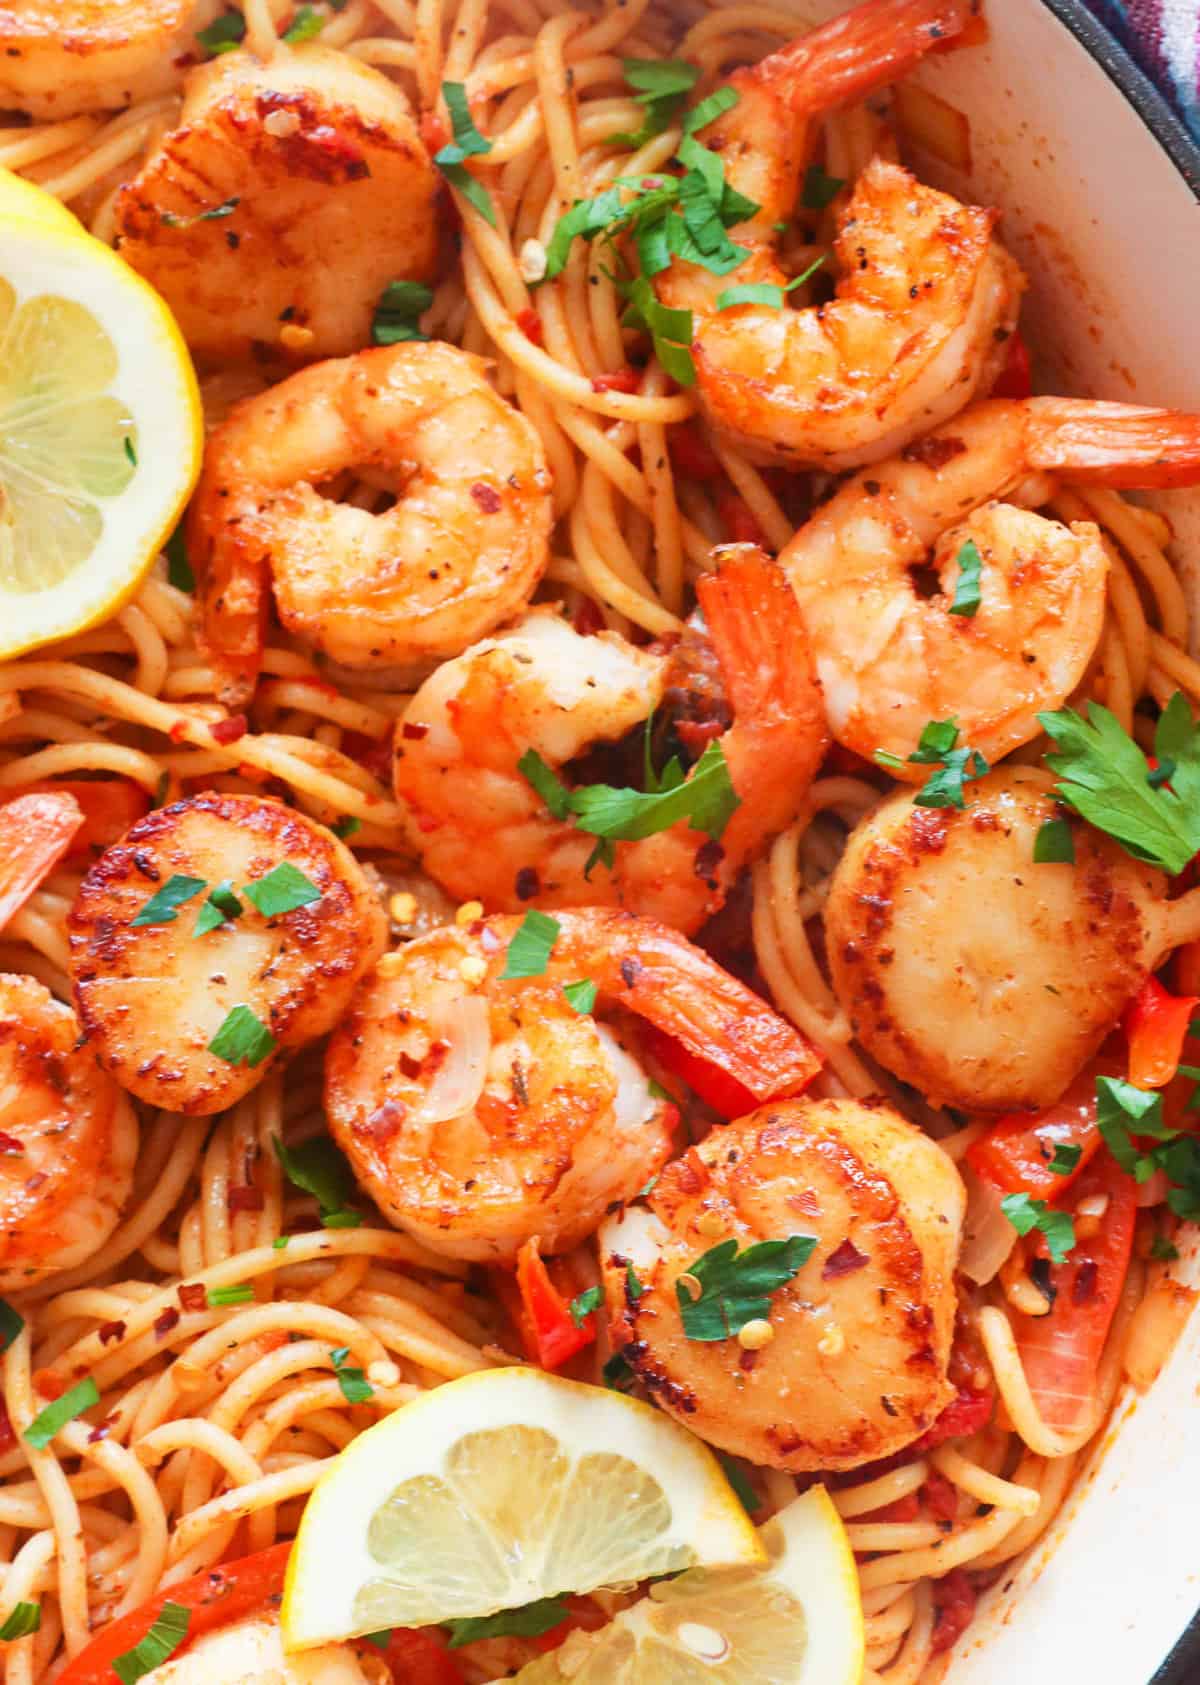 Delicious seafood pasta with shrimp and scallops